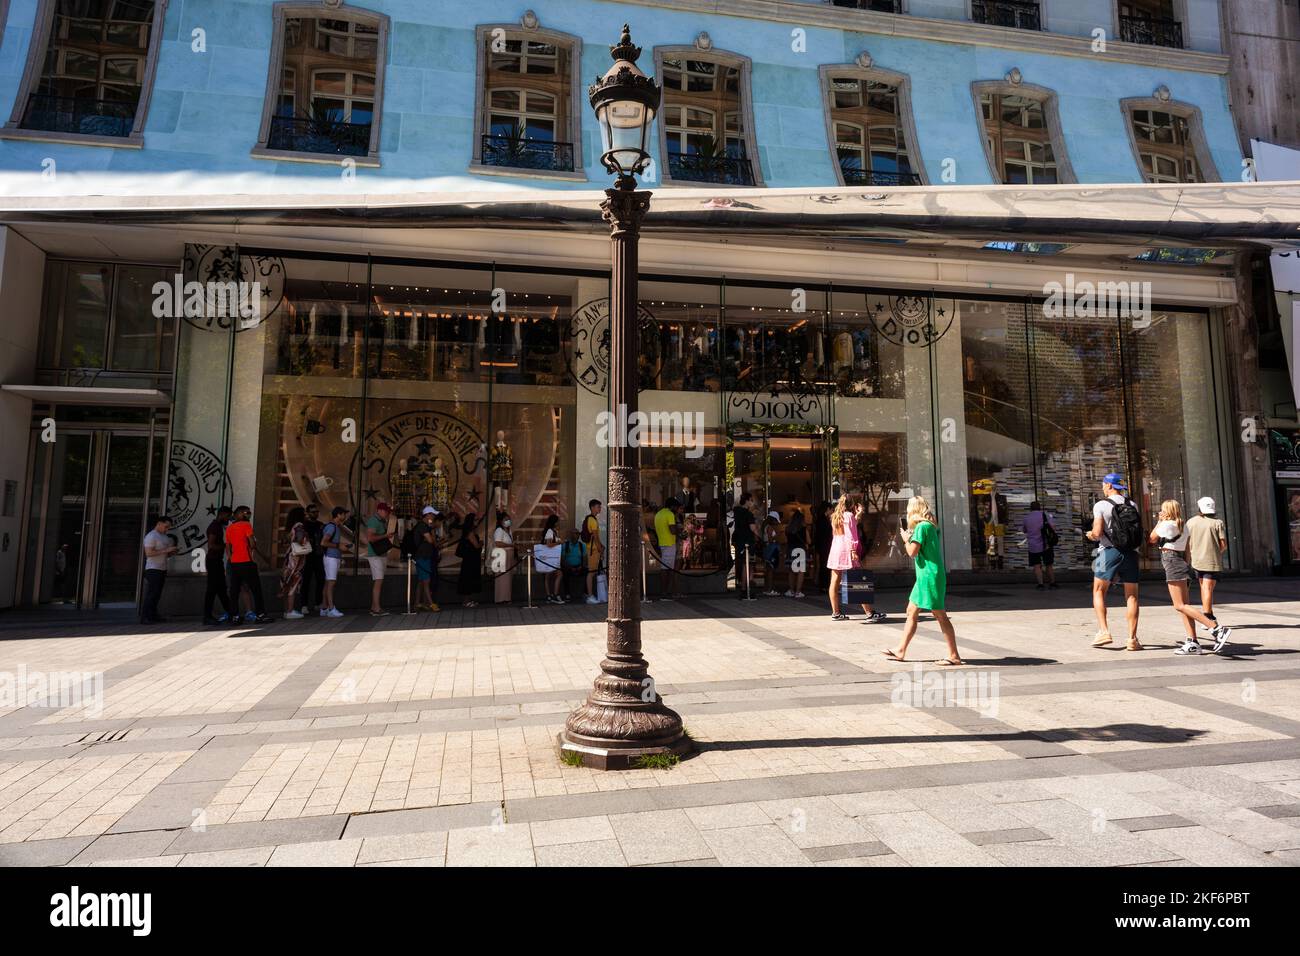 Paris, France - July 16, 2022: Exterior view of Dior boutique with a row of people in the Avenue des Champs-Elysees Stock Photo